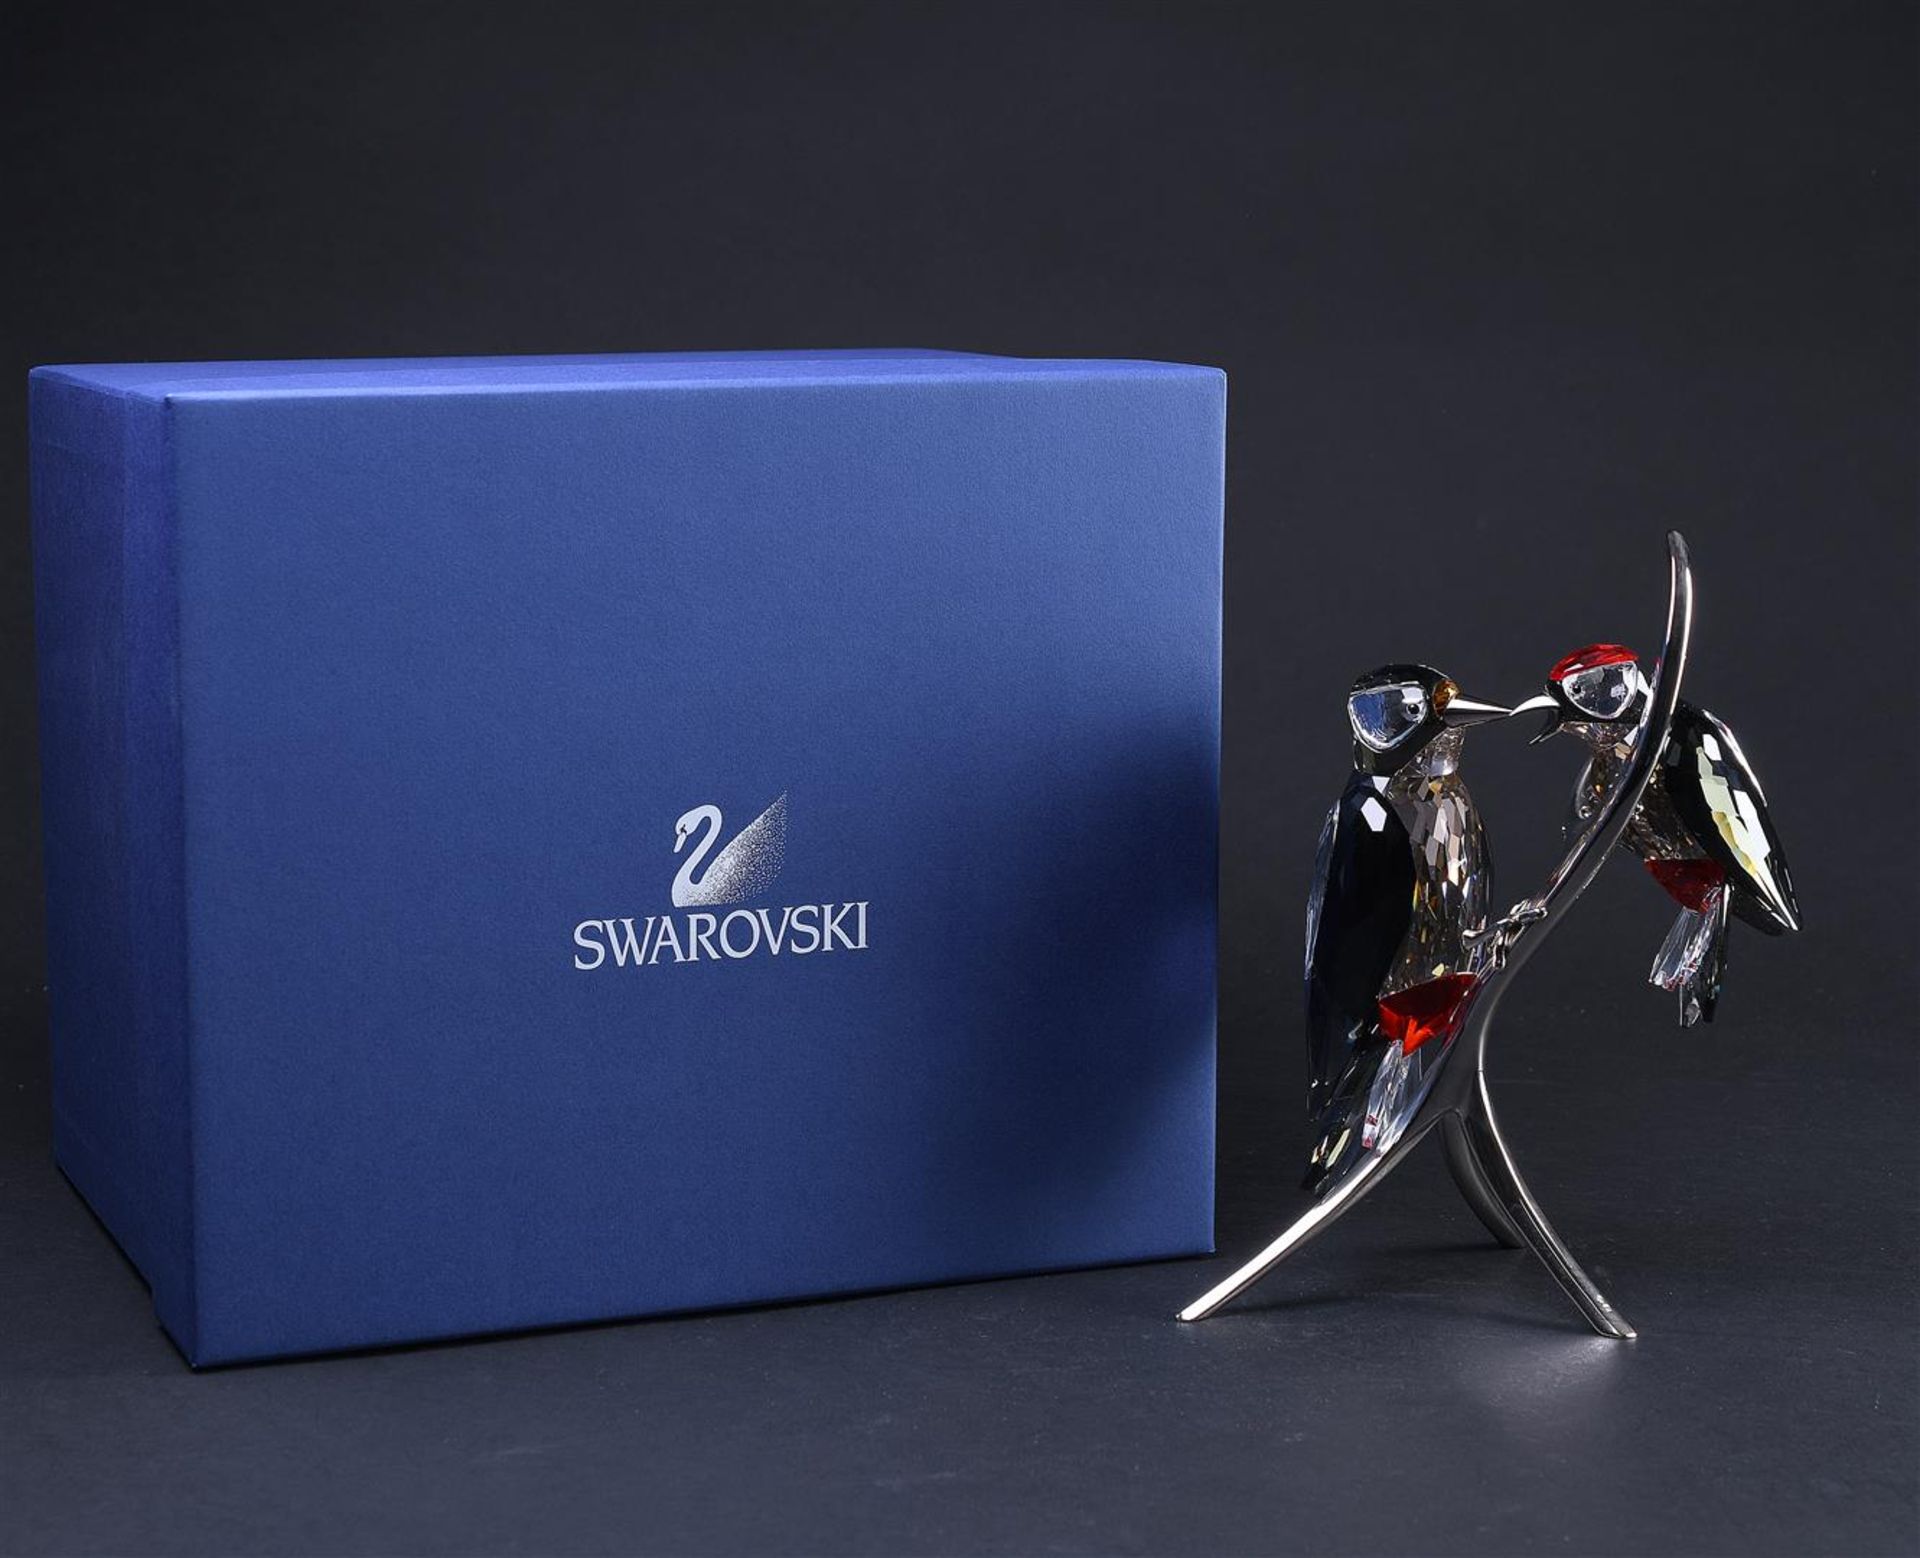 Swarovski, woodpeckers, Year of issue 2009,957562. Includes original box.
H. 21,9 cm. - Image 9 of 9